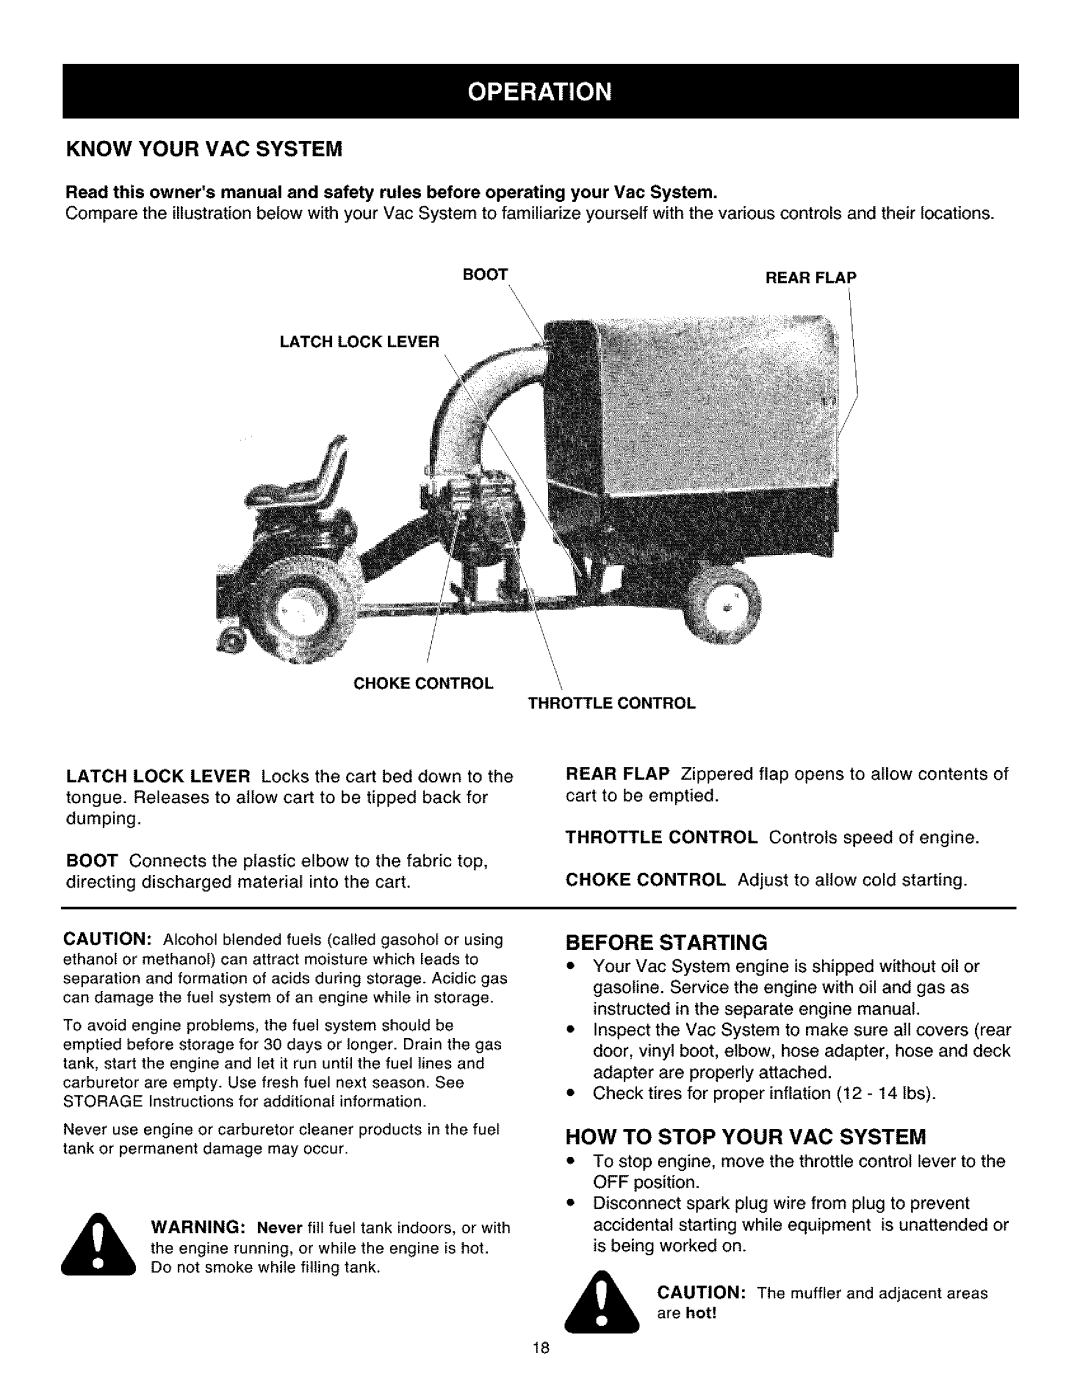 Craftsman 486.24504 Know Your VAC System, Boot, Latch Lock Lever, Before Starting, HOW to Stop Your VAC System 